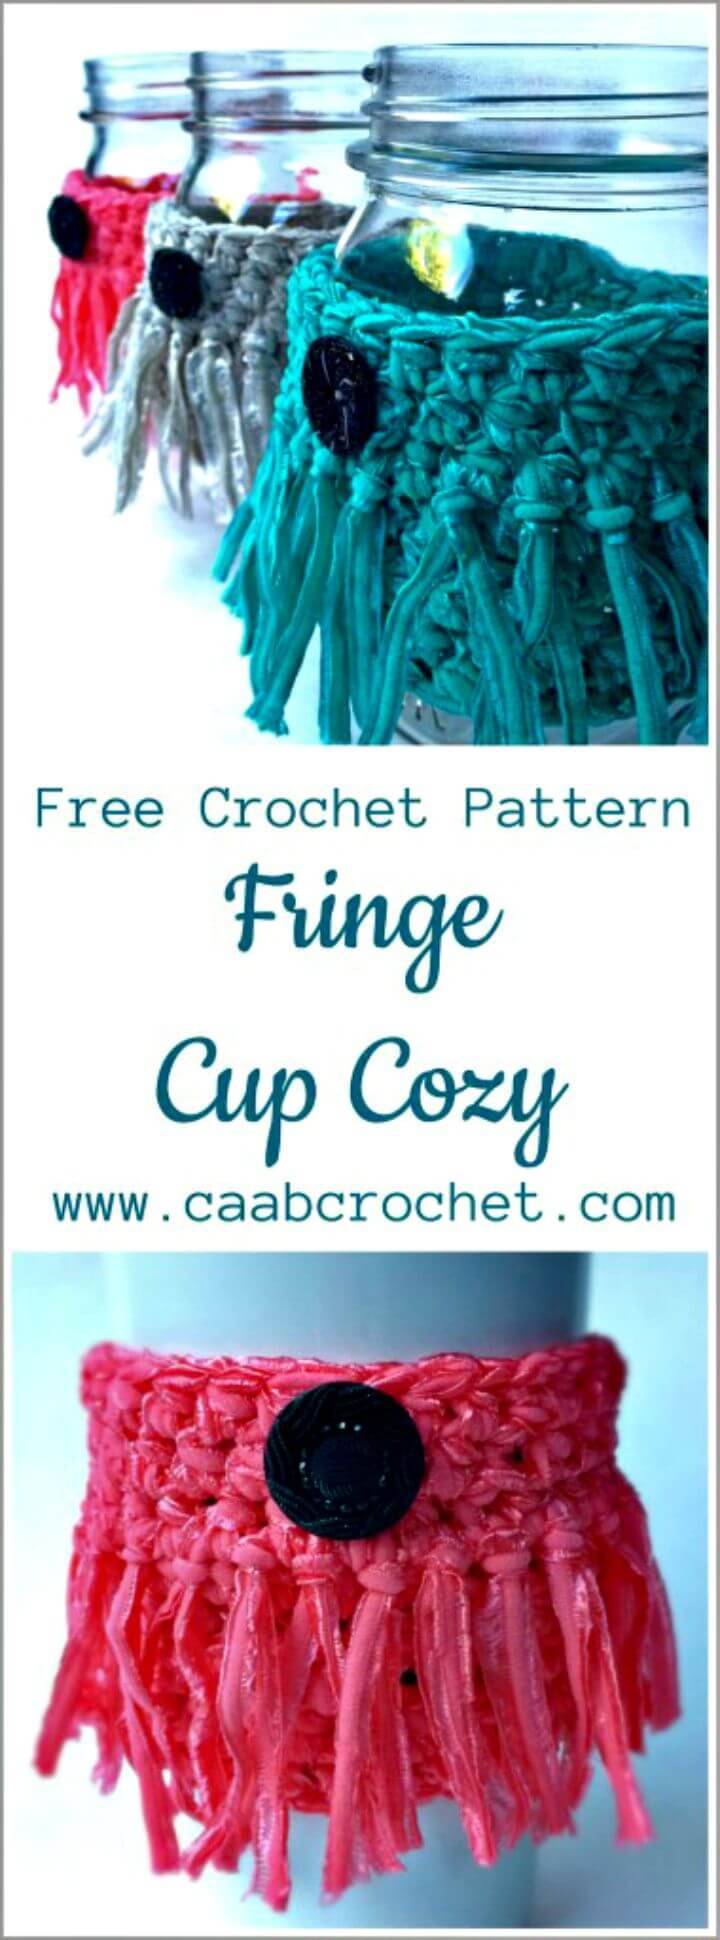 How To Free Crochet Fringe Cup Cozy Pattern